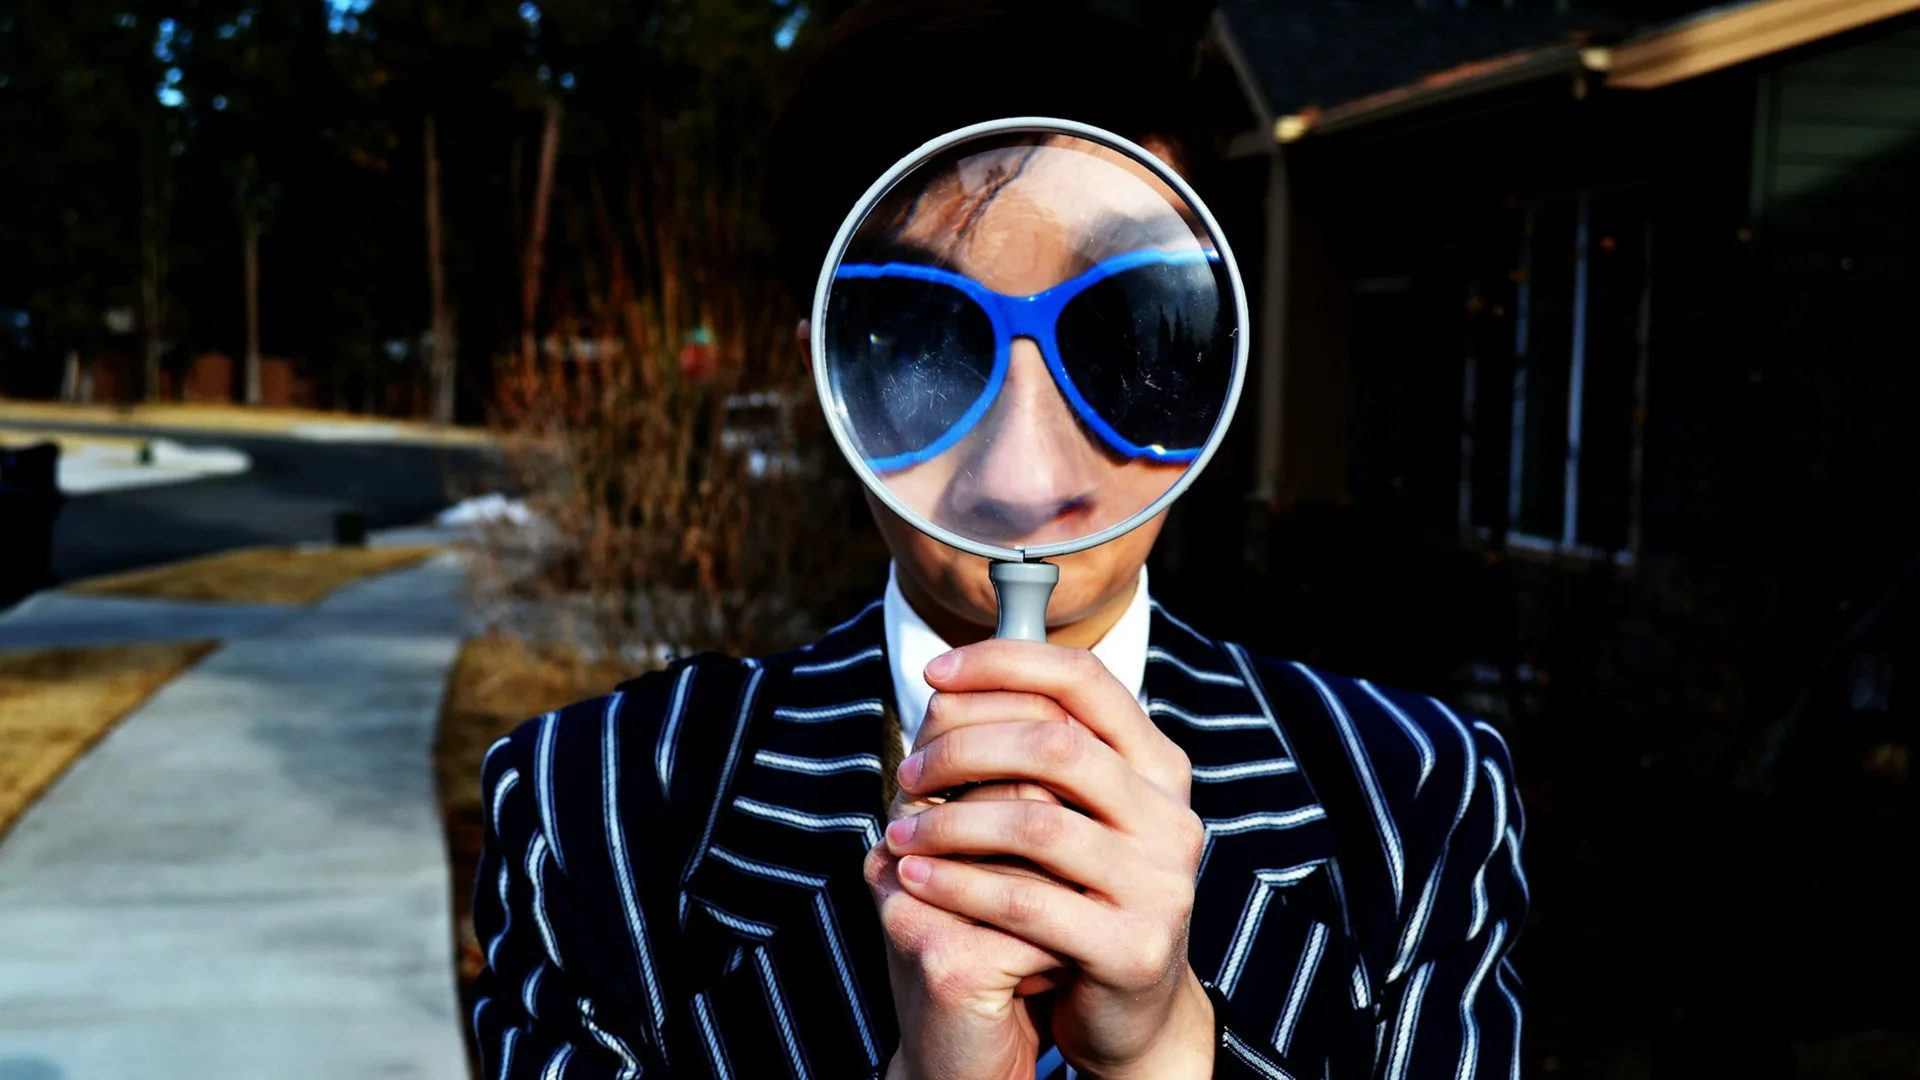 Person wearing a pinstriped jacket holds magnifying glass in front of face so it makes their nose and blue glasses very large